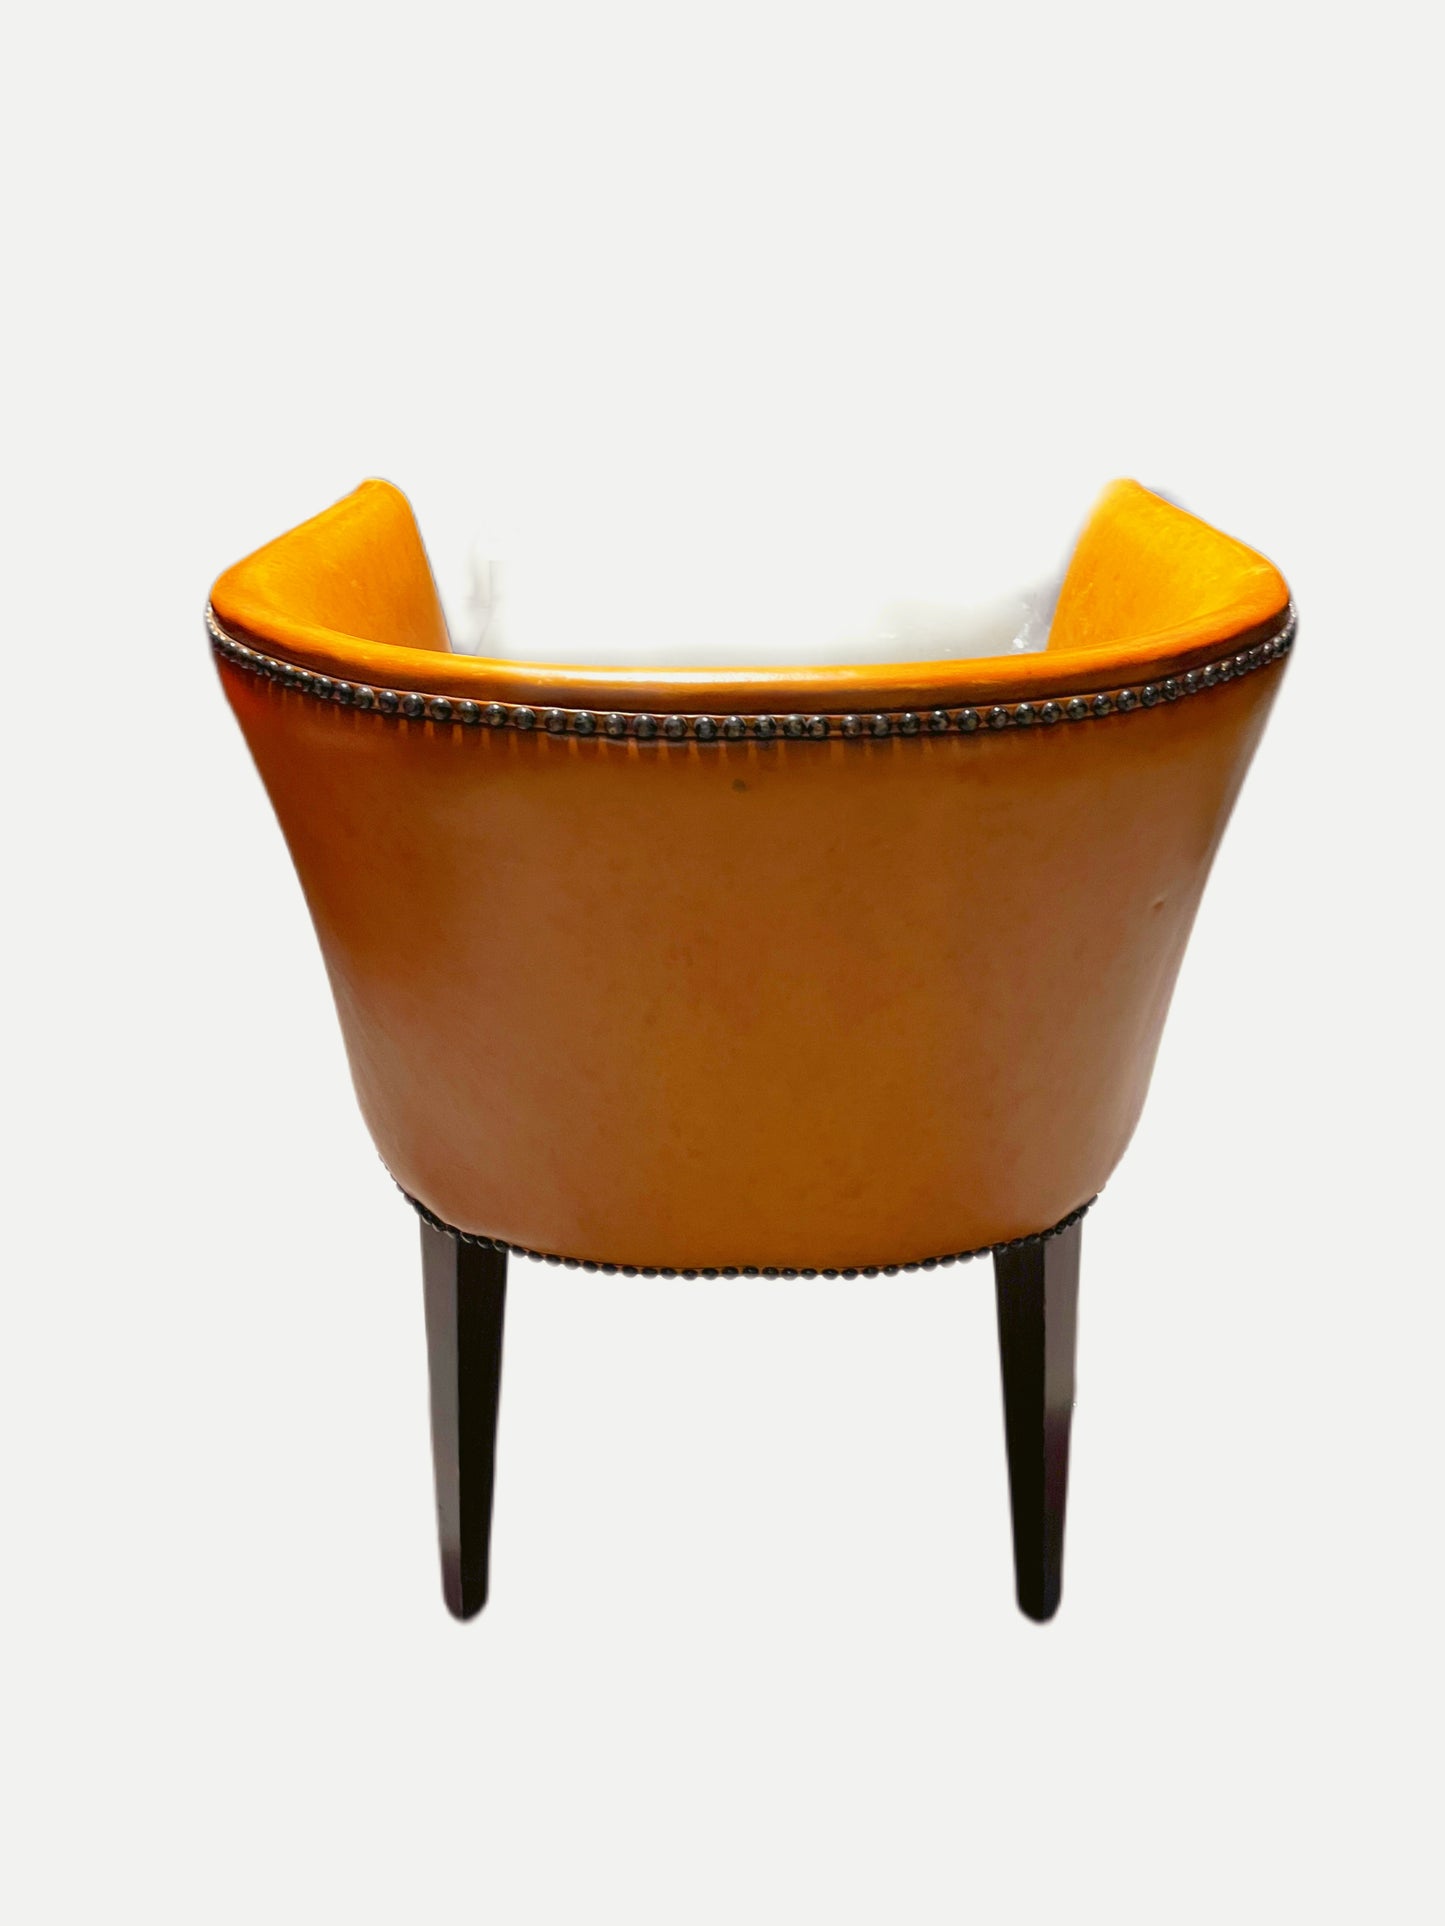 YELLOW ORANGE LEATHER CLUB CHAIR WITH RIVETS